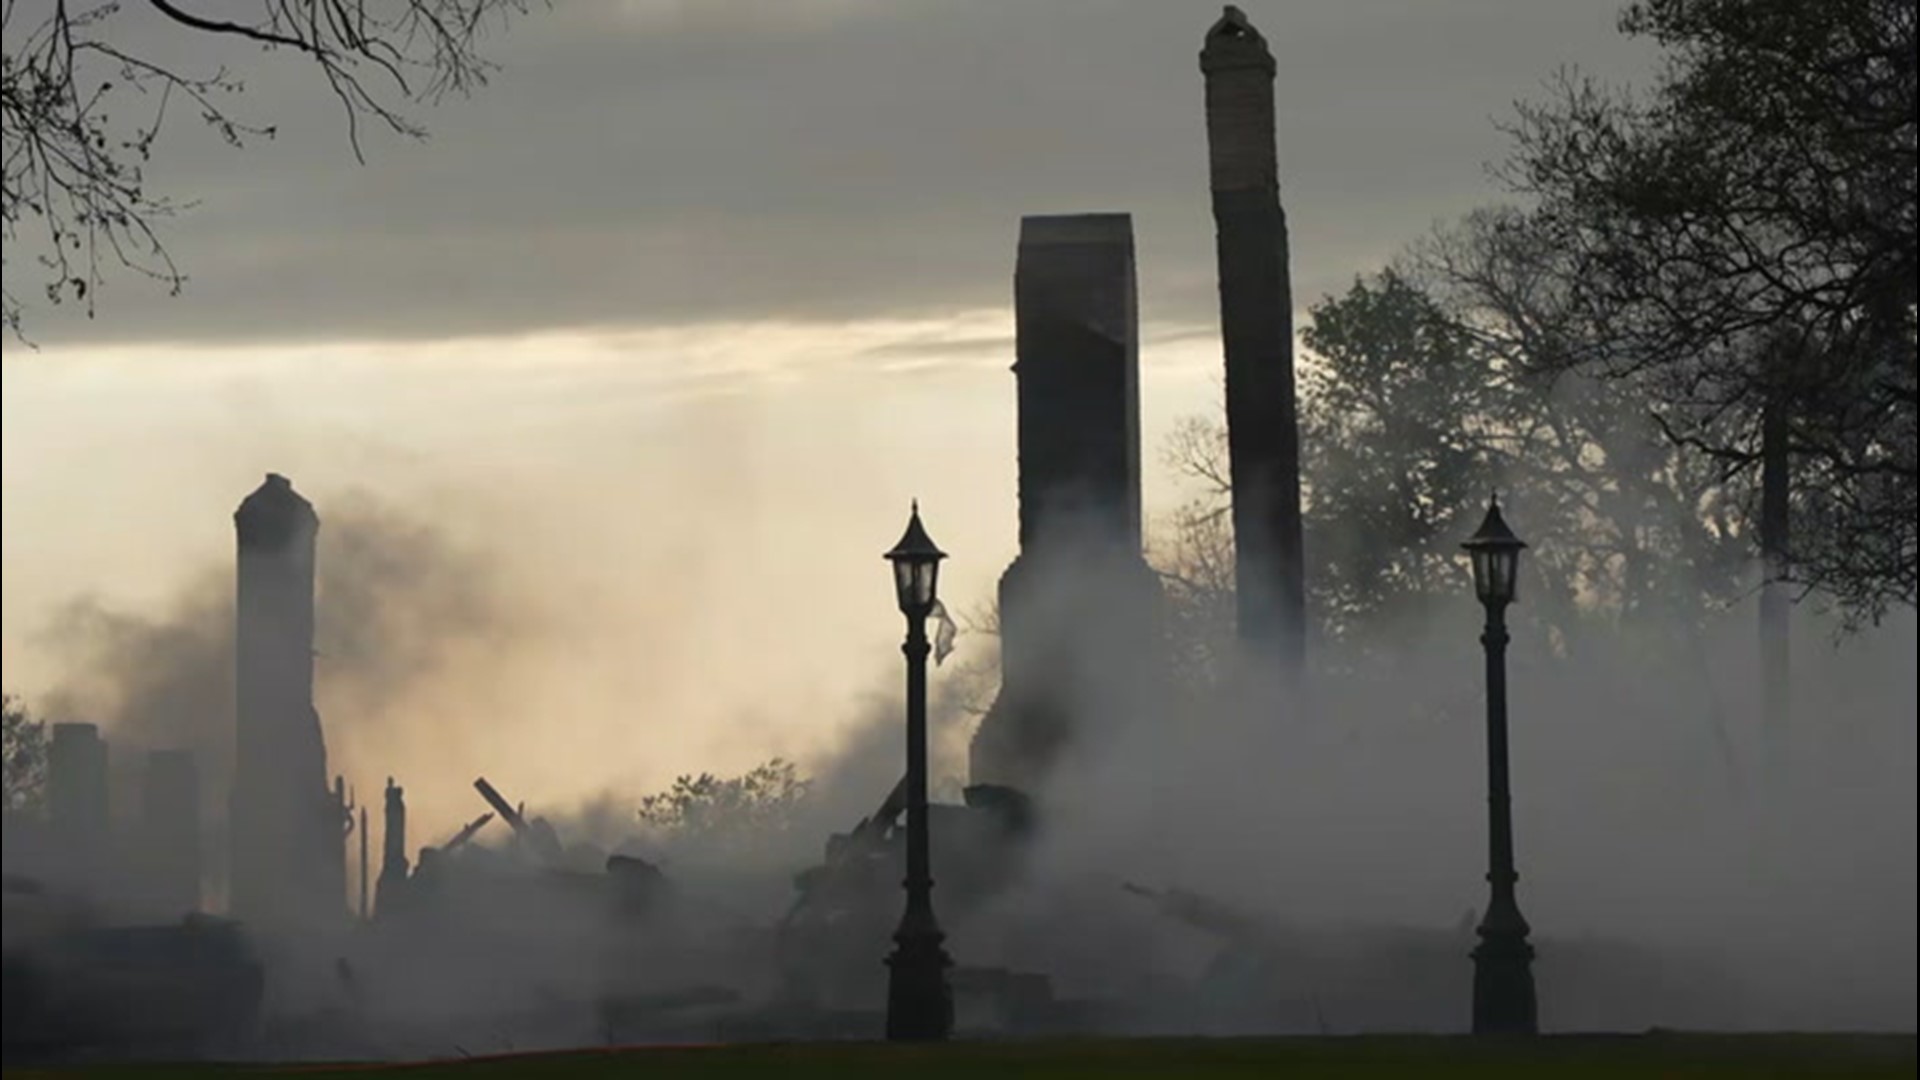 The historic Azalee Plantation in Doyline, Louisiana, built in 1844 and served as a wedding venue, was destroyed in a fire that was suspected to be caused by a lightning strike on April 7.